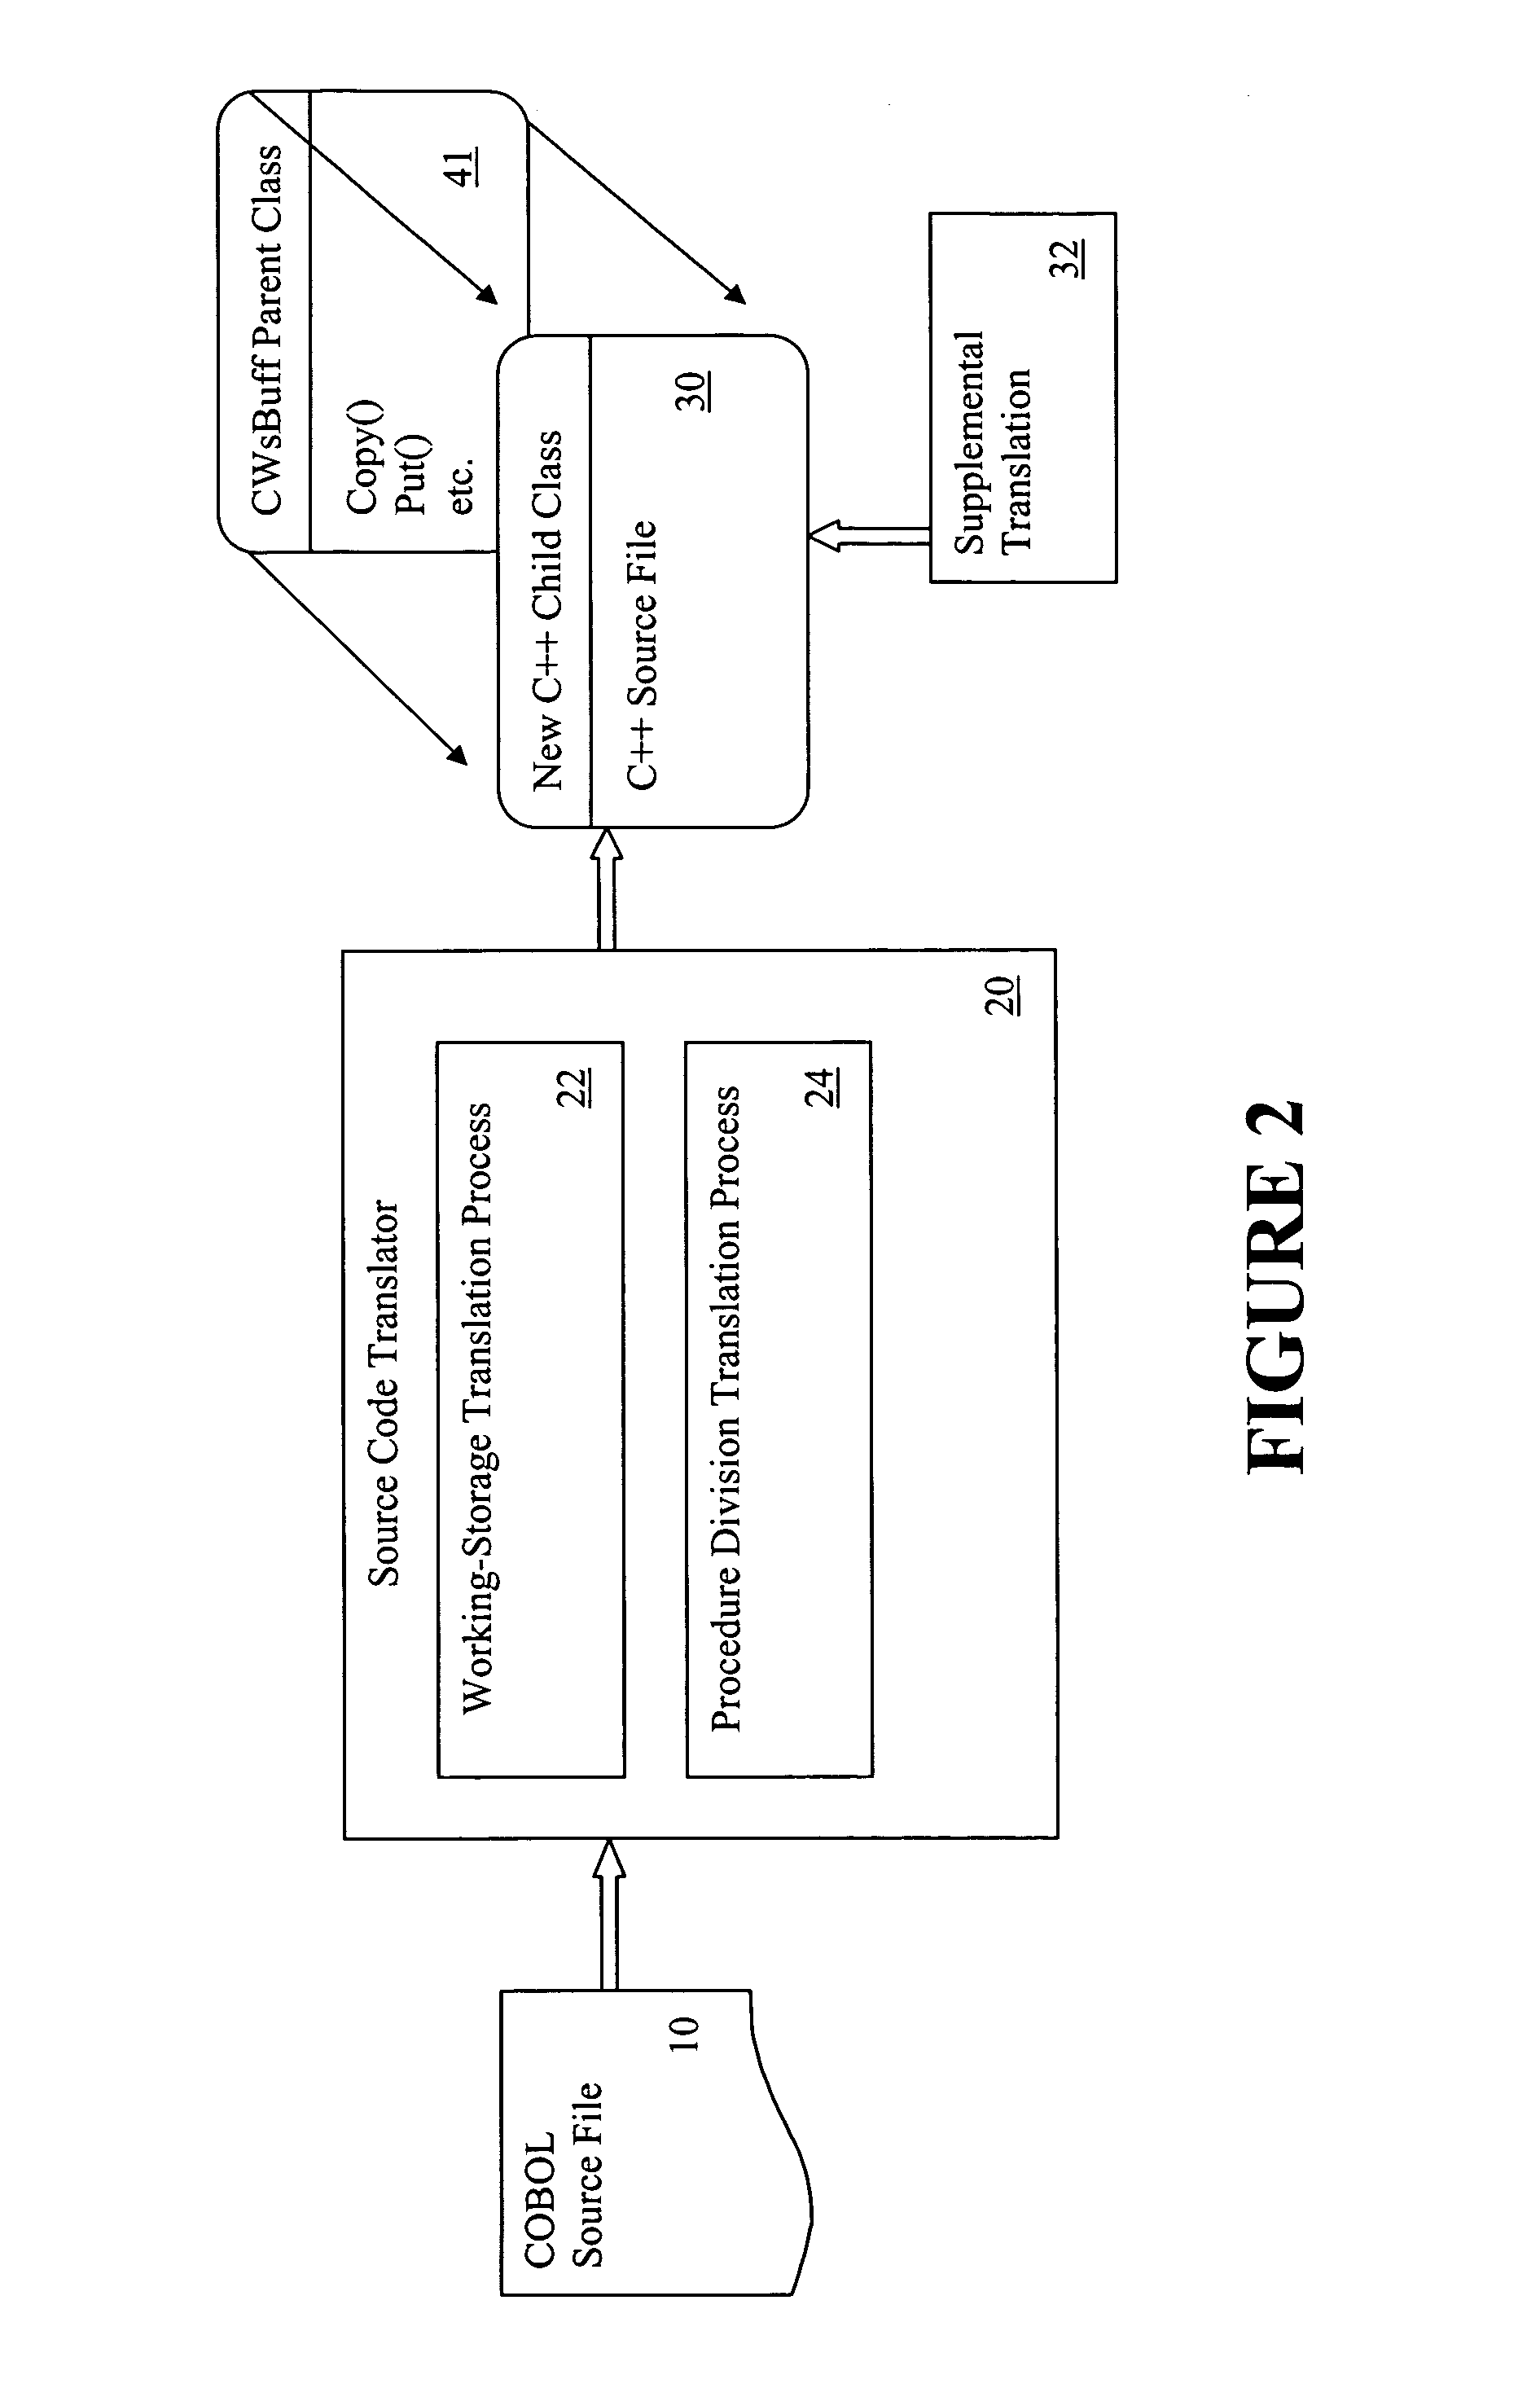 Method, apparatus, and program for source code translation from COBOL to object-oriented code